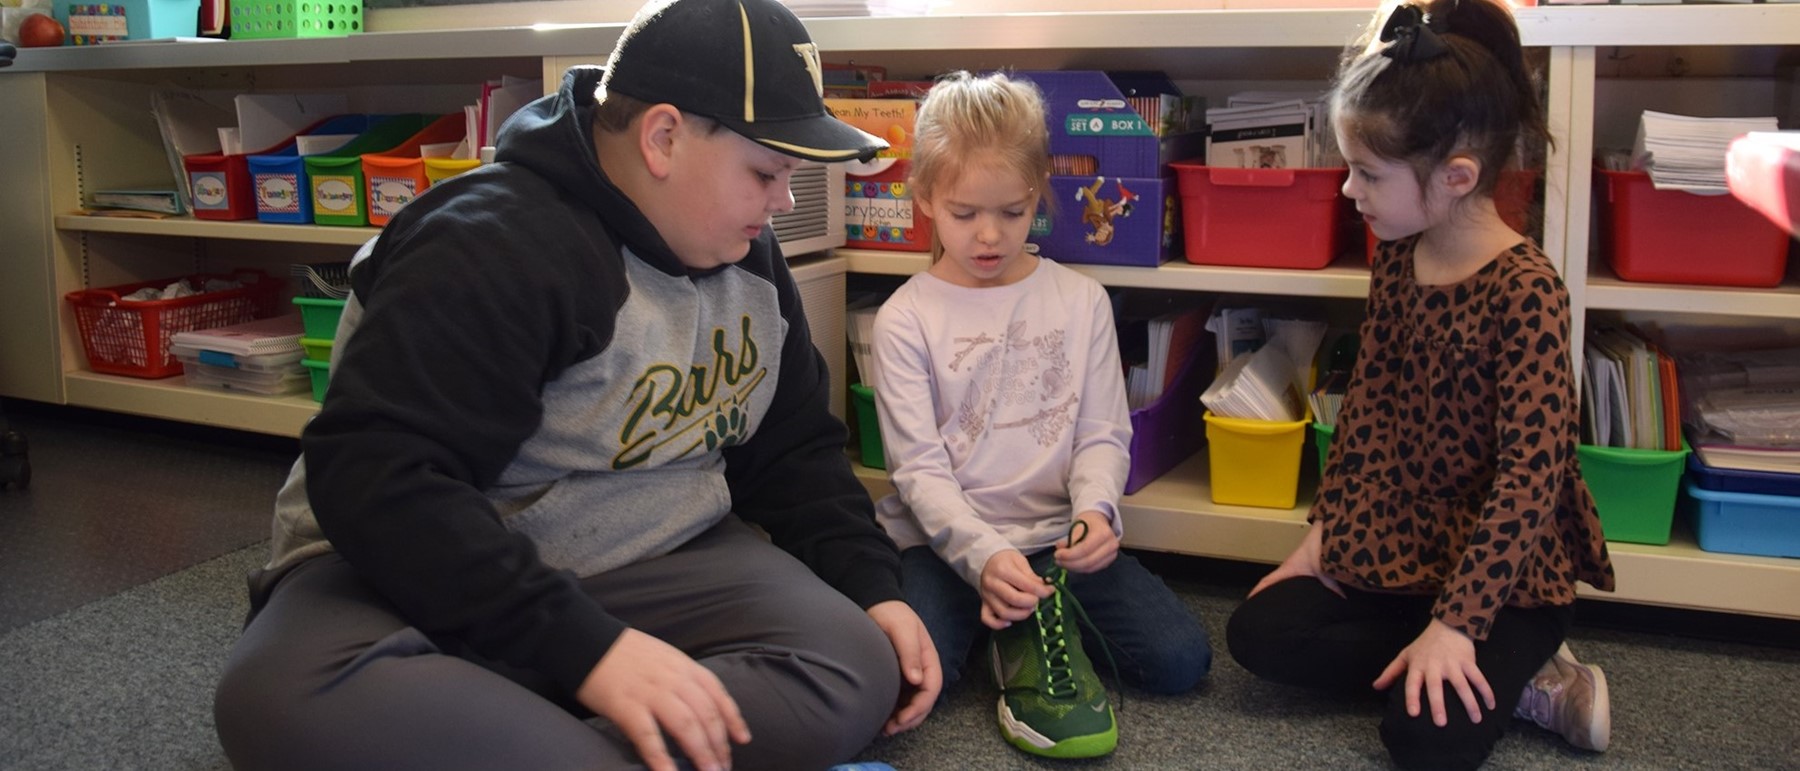 A Tioga Hills fifth-grader helps two Kindergarten students learn how to tie their shoelaces.